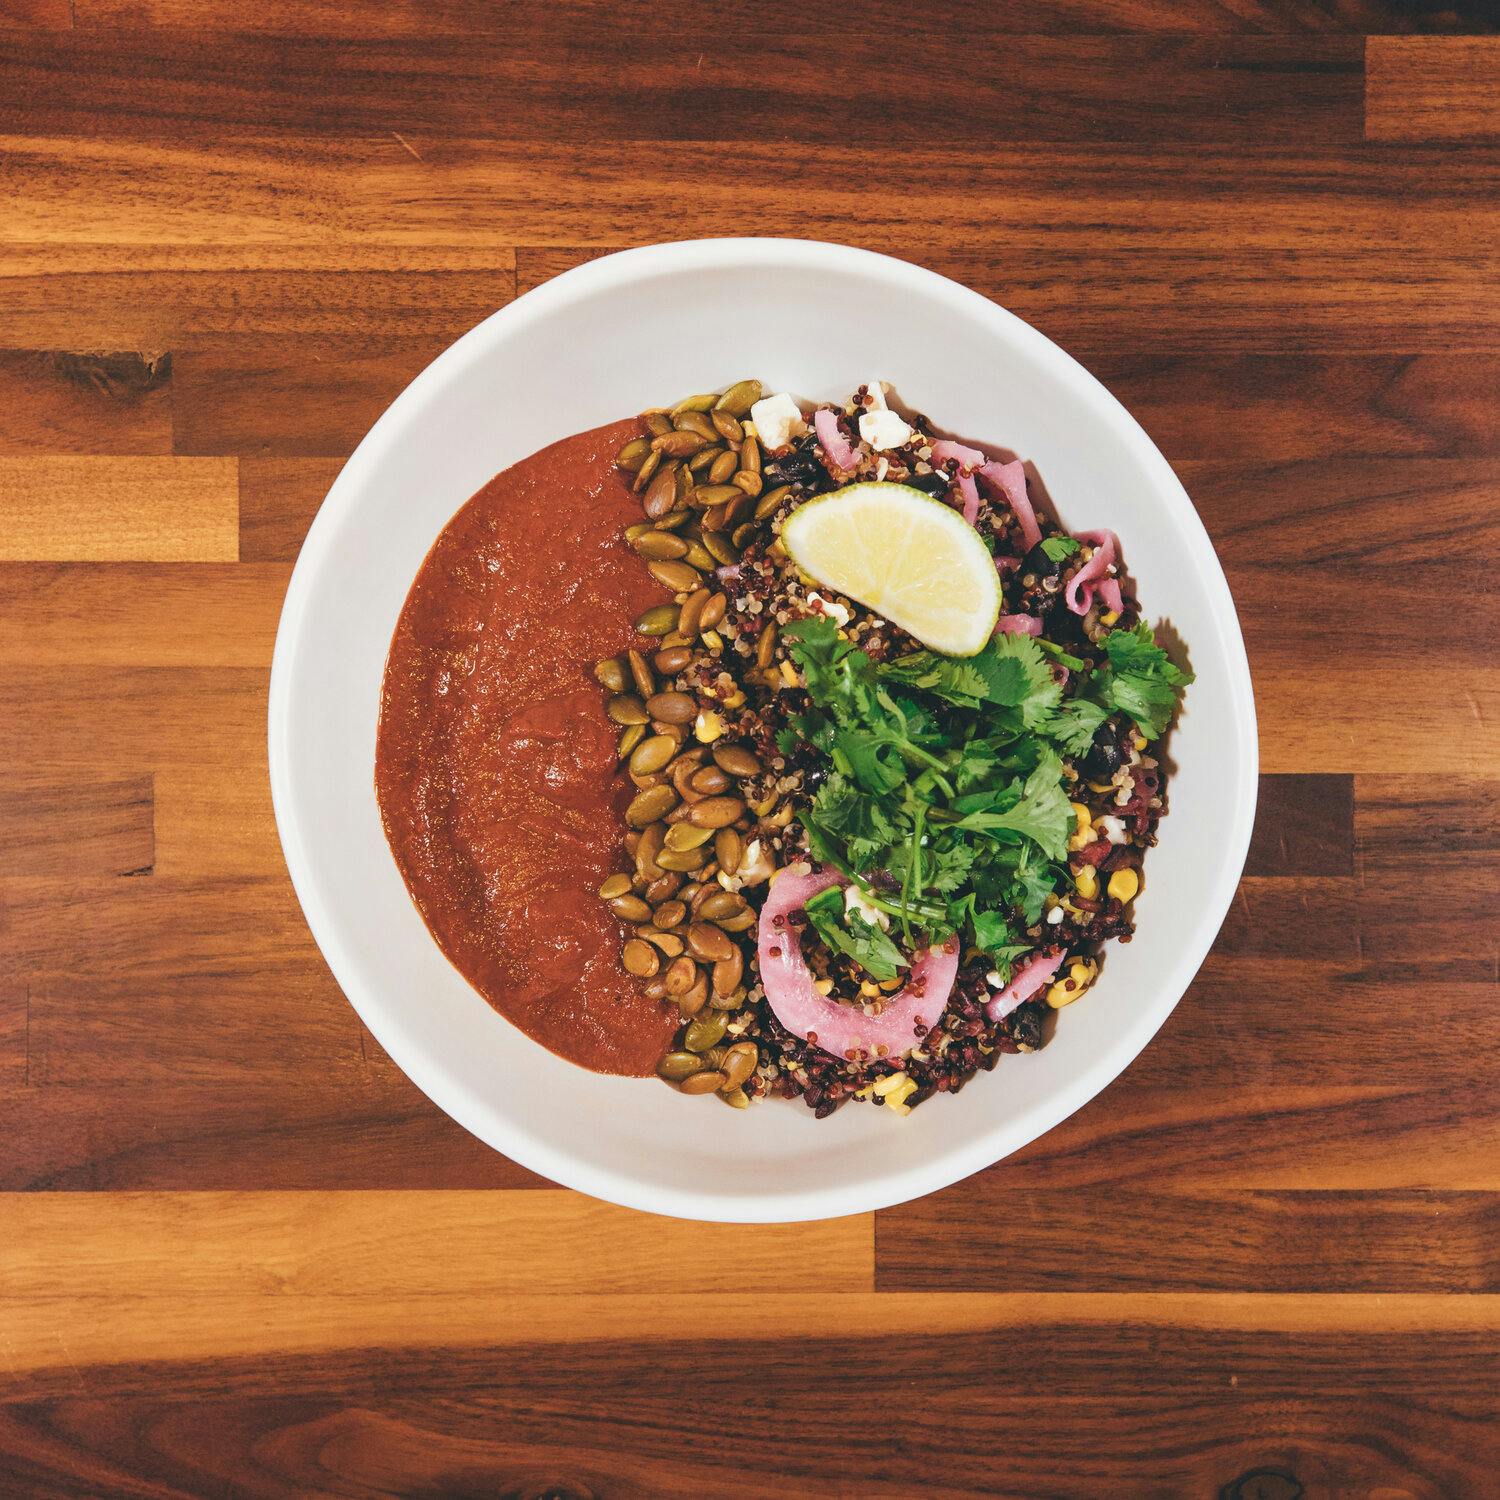 Mole Bowl (V)(GF) from Forage Kitchen - Hilldale in Madison, WI